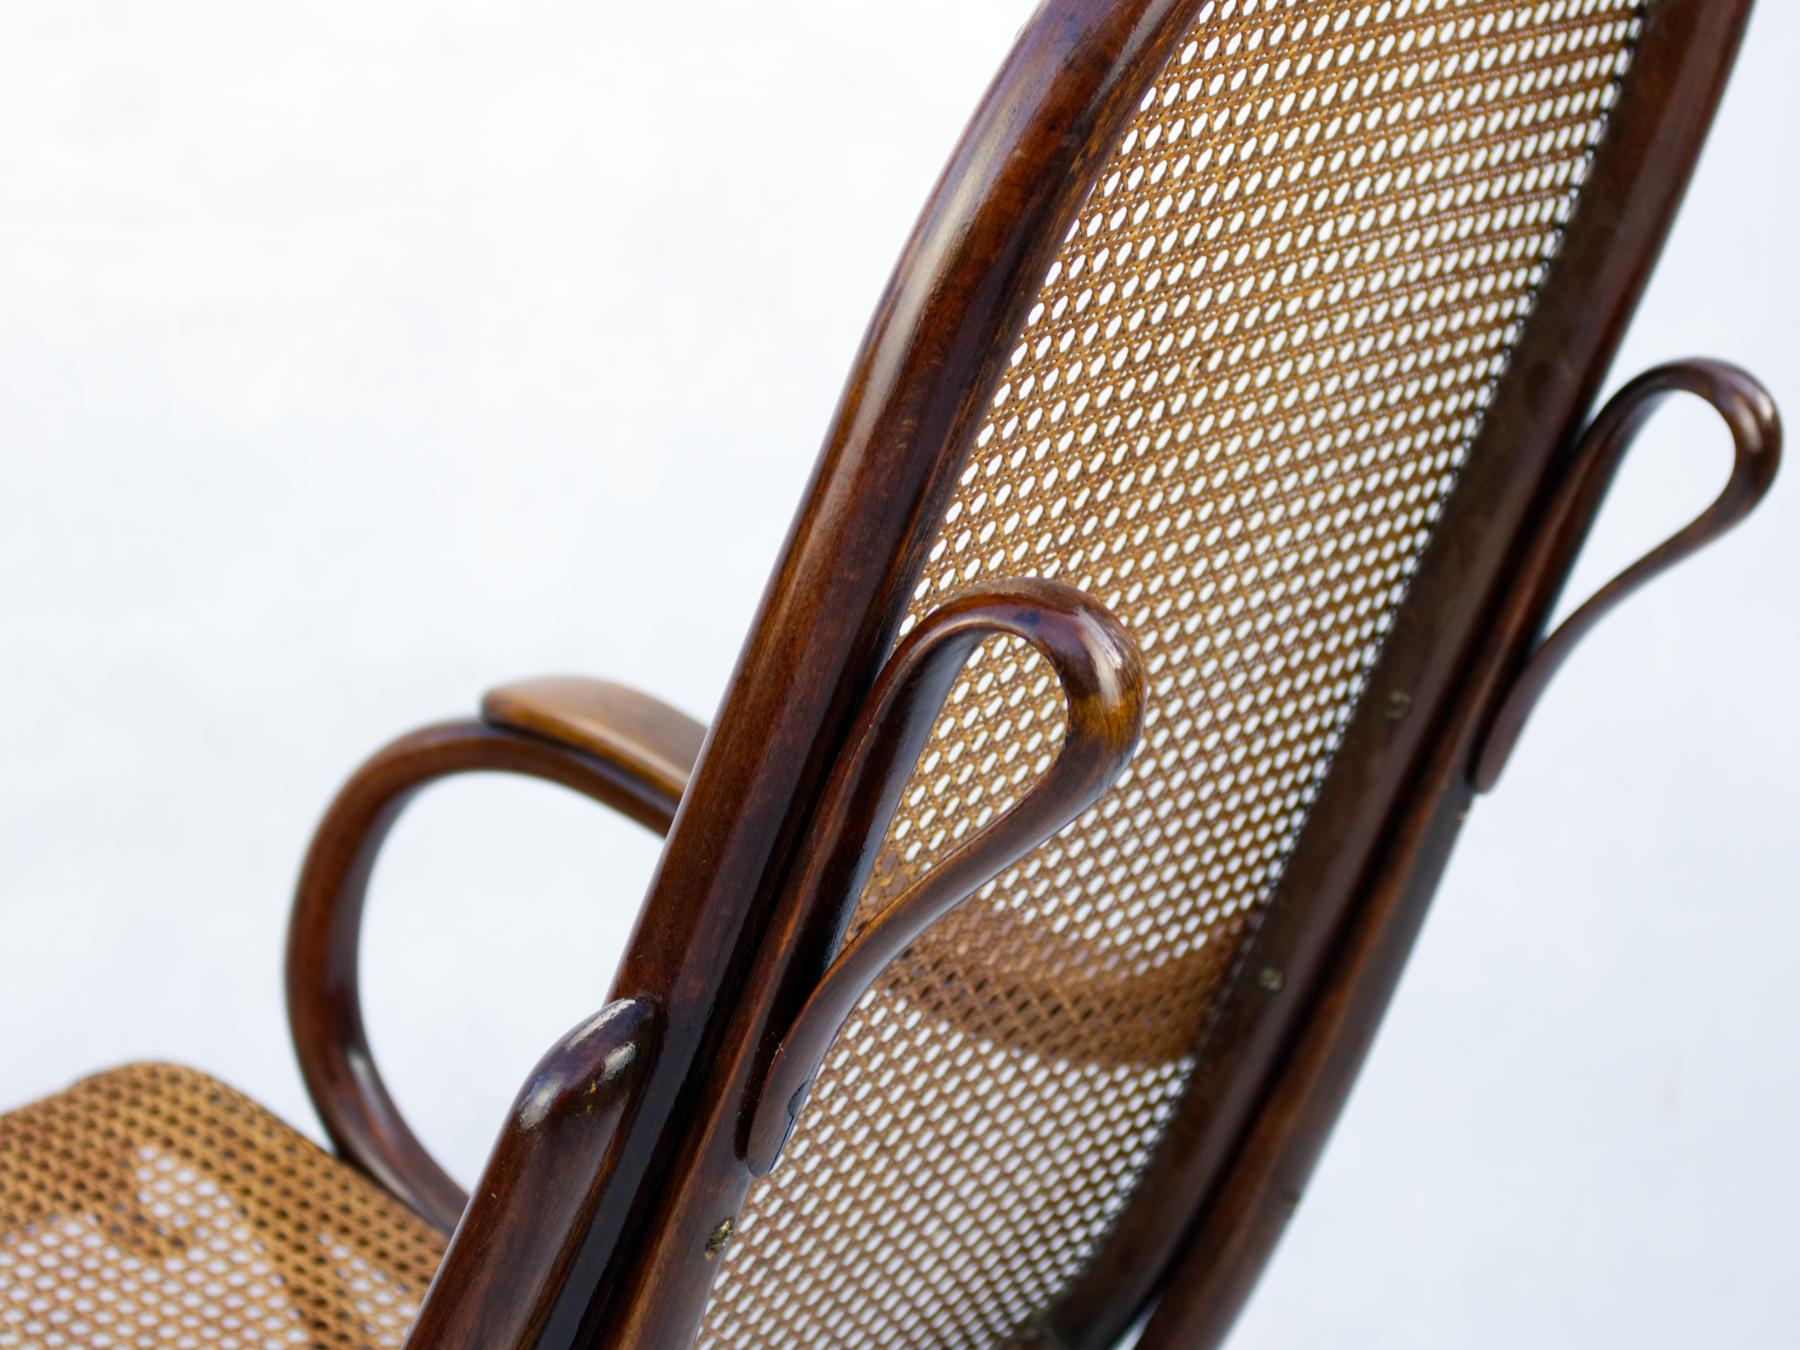 Bentwood Cane Salonfauteuil Easy Chair Thonet No. 1, circa 1890 In Good Condition For Sale In Lucenec, SK